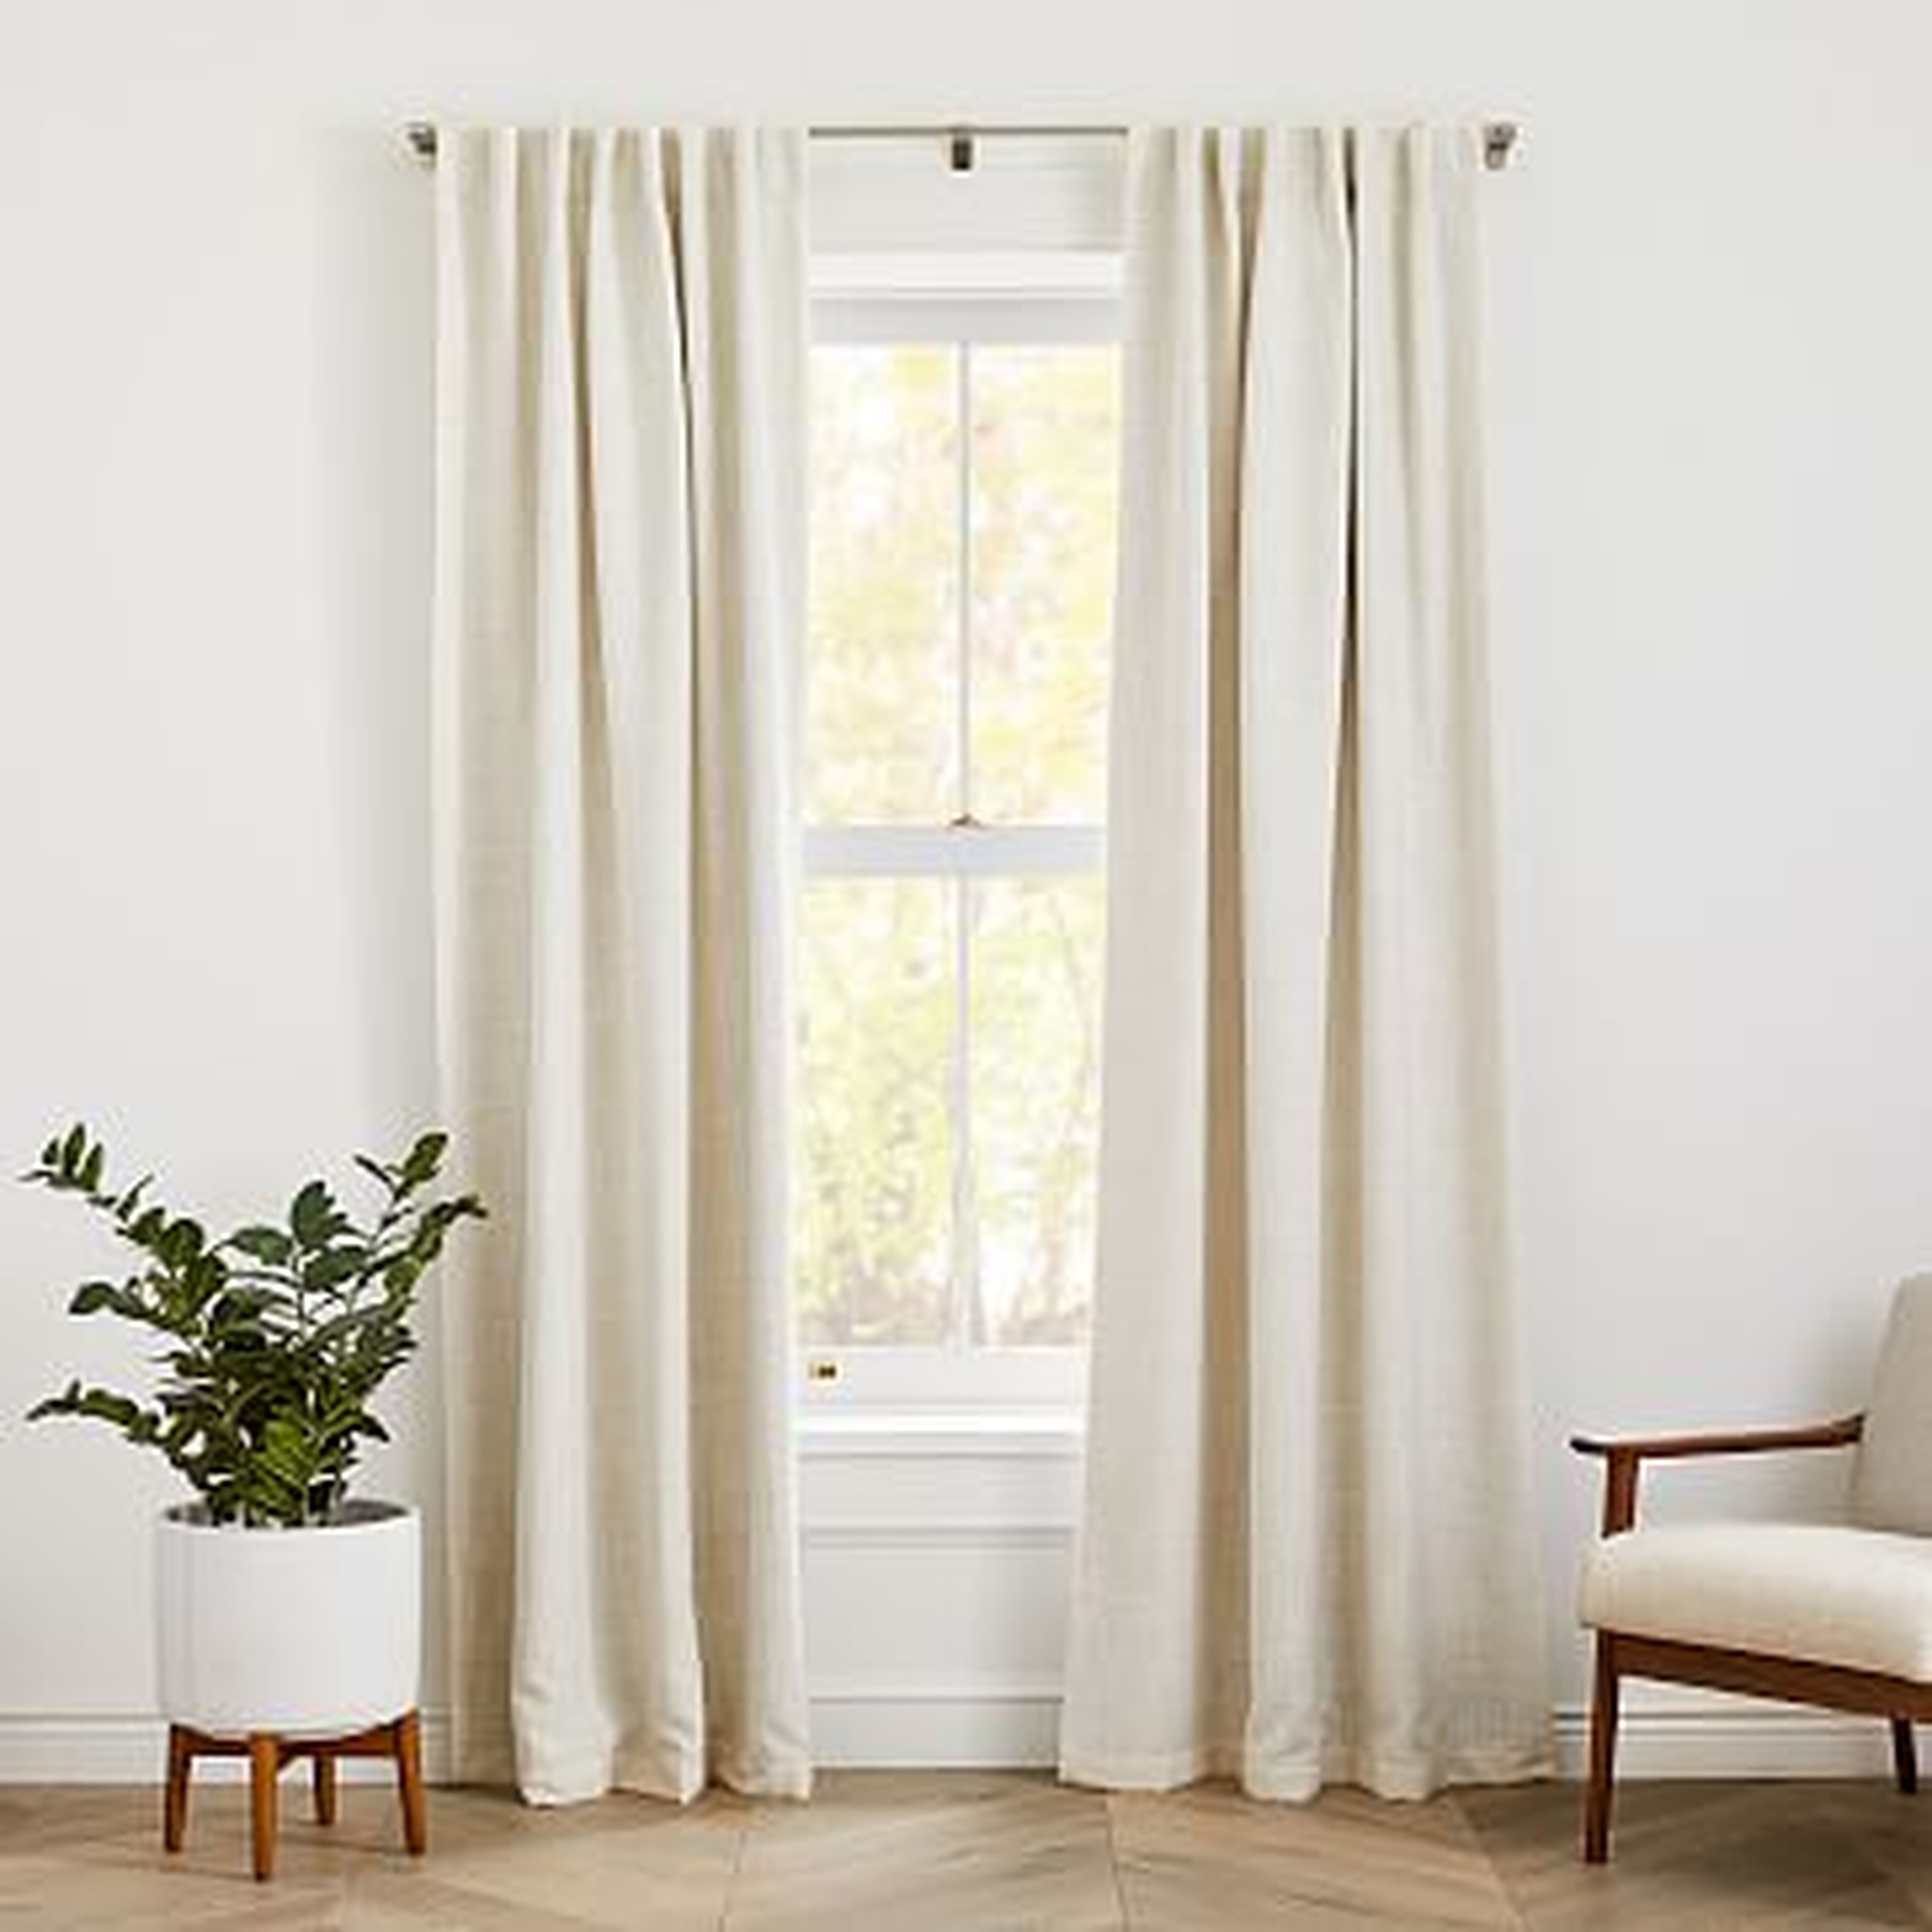 Crossweave Curtain with Black Out Natural Canvas, 48" x 84" - West Elm